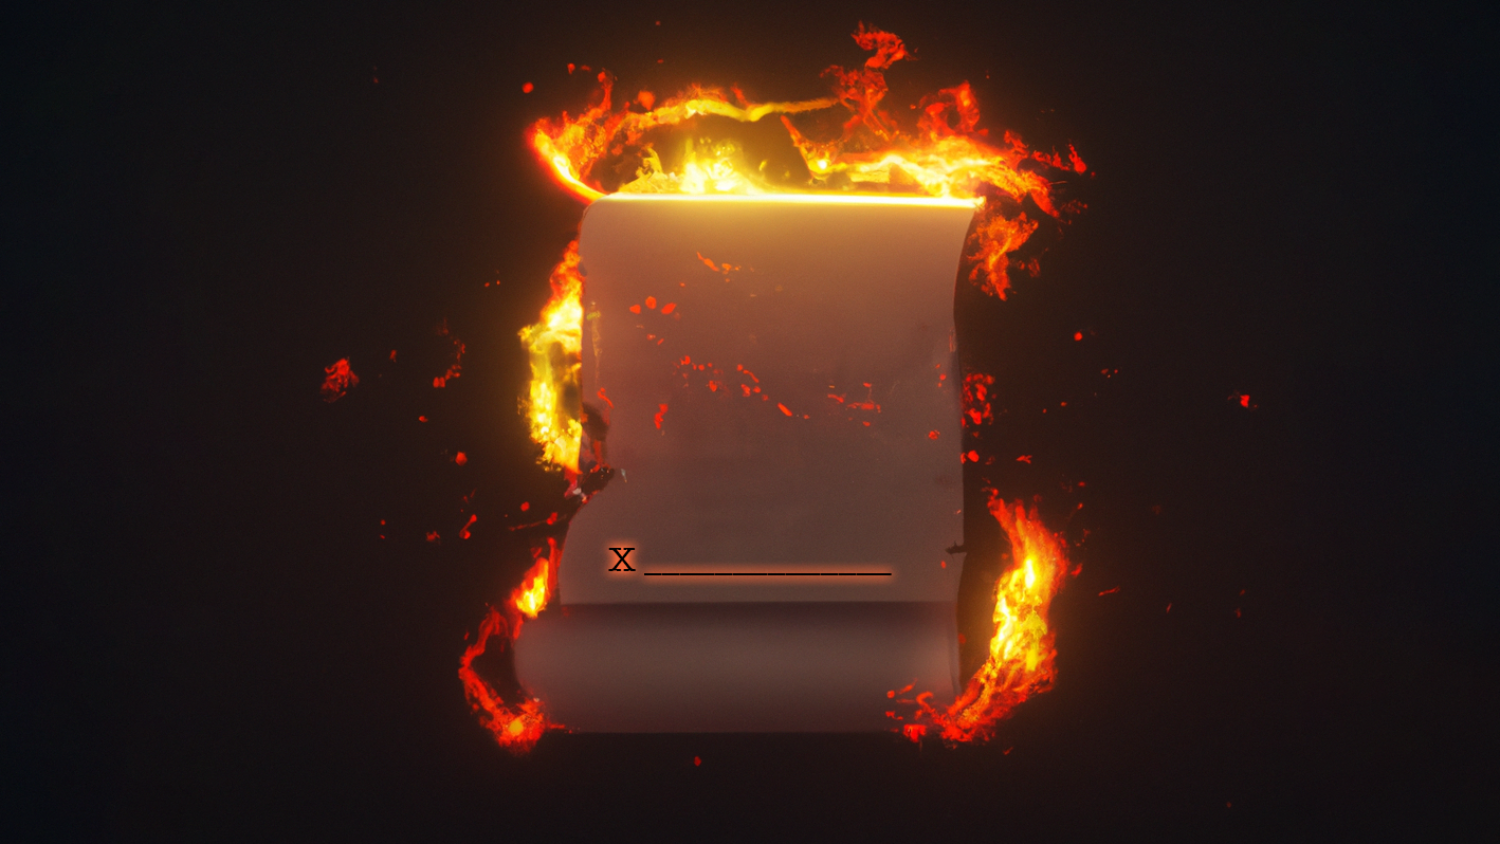 An ominous looking legal document with flames around the edges